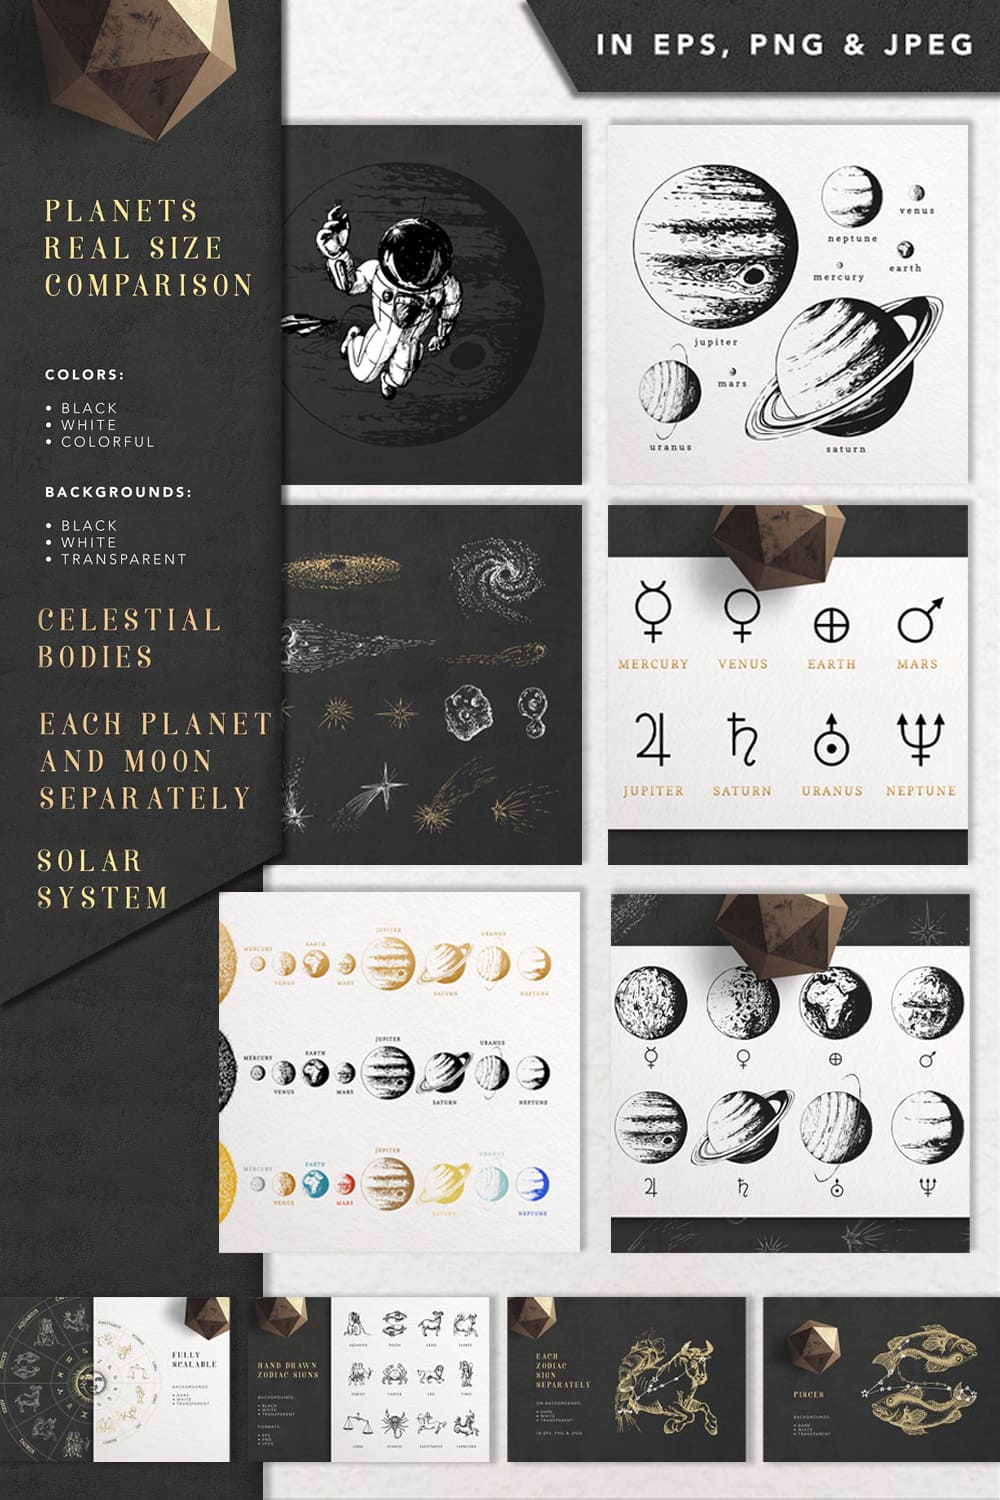 Space Collection with Moon and Planets pinterest image.